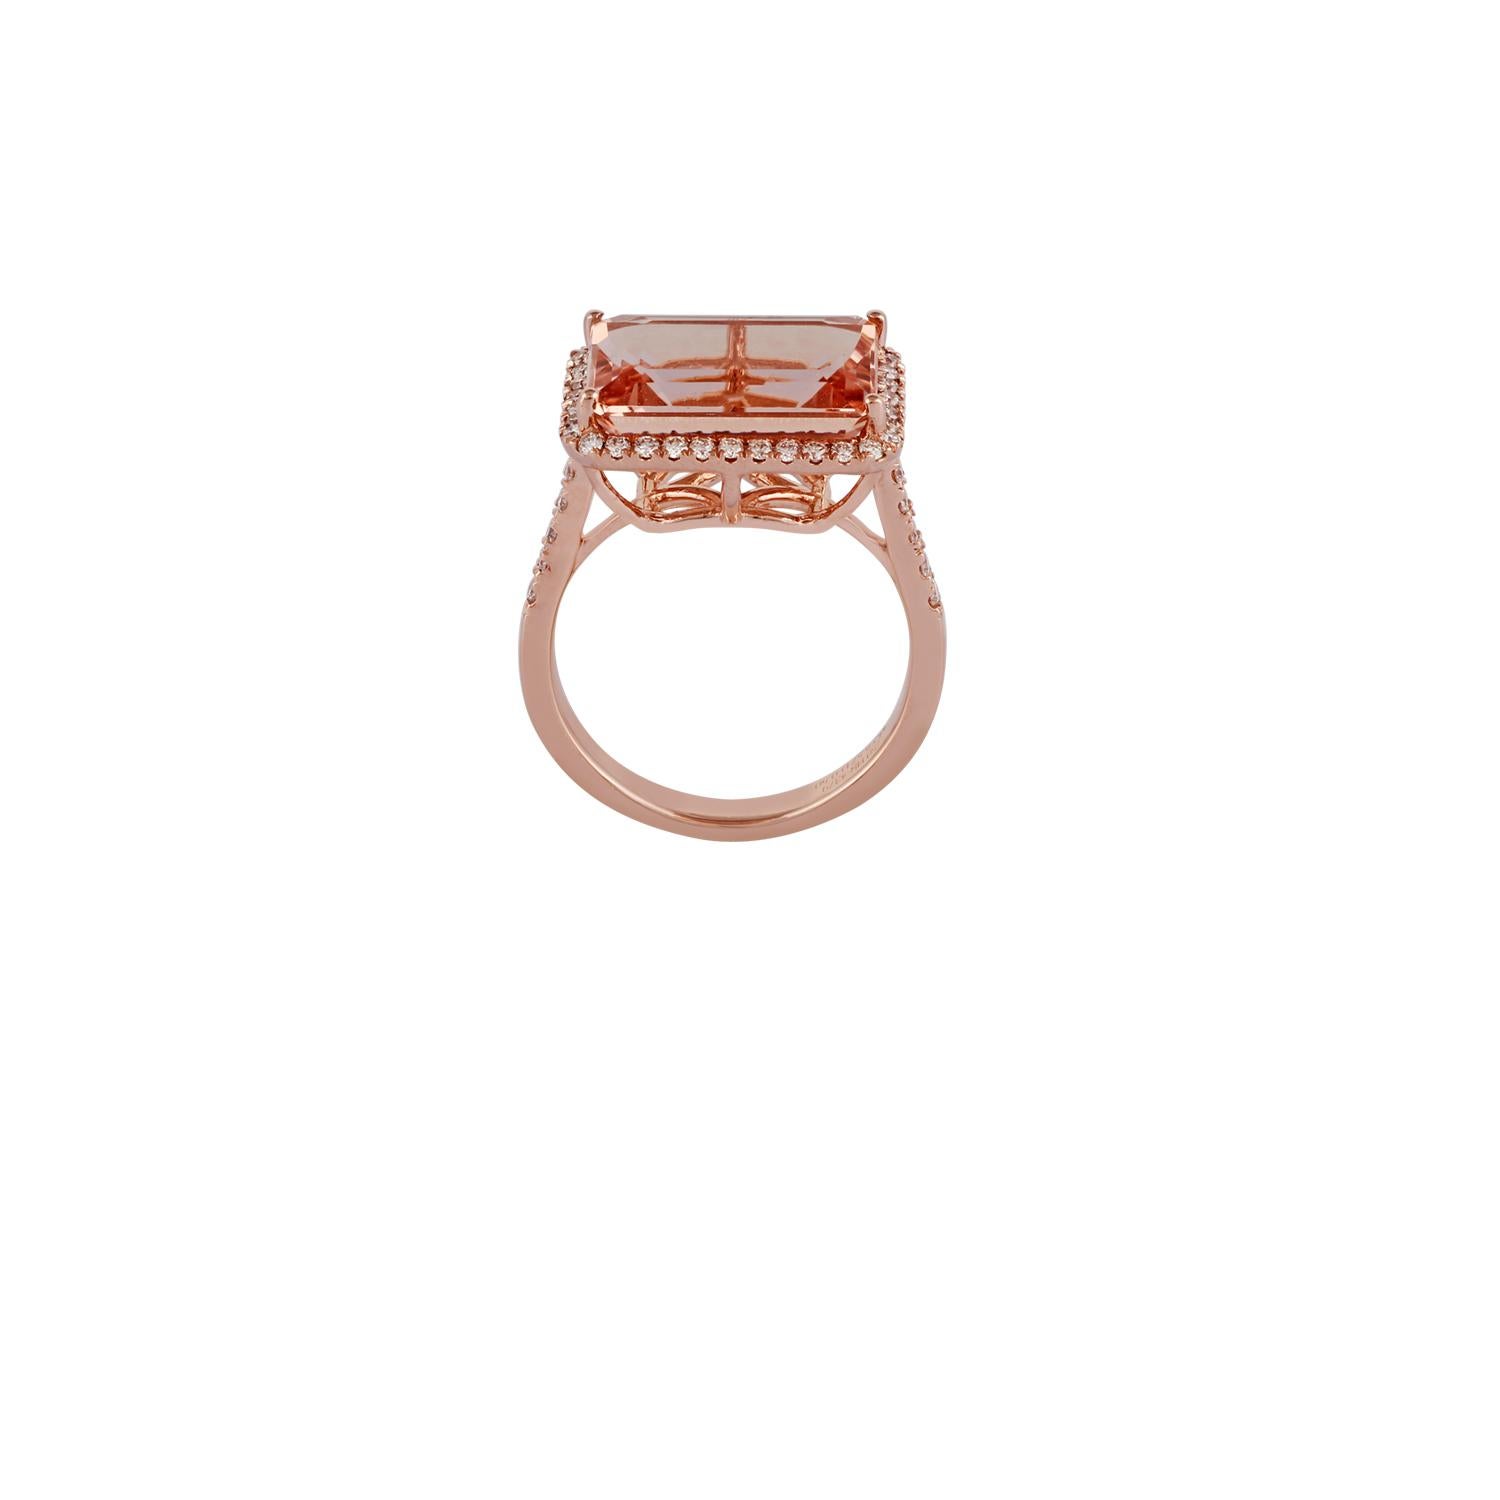 Contemporary Morganite and Diamond Ring Studded in 18 Karat Rose Gold